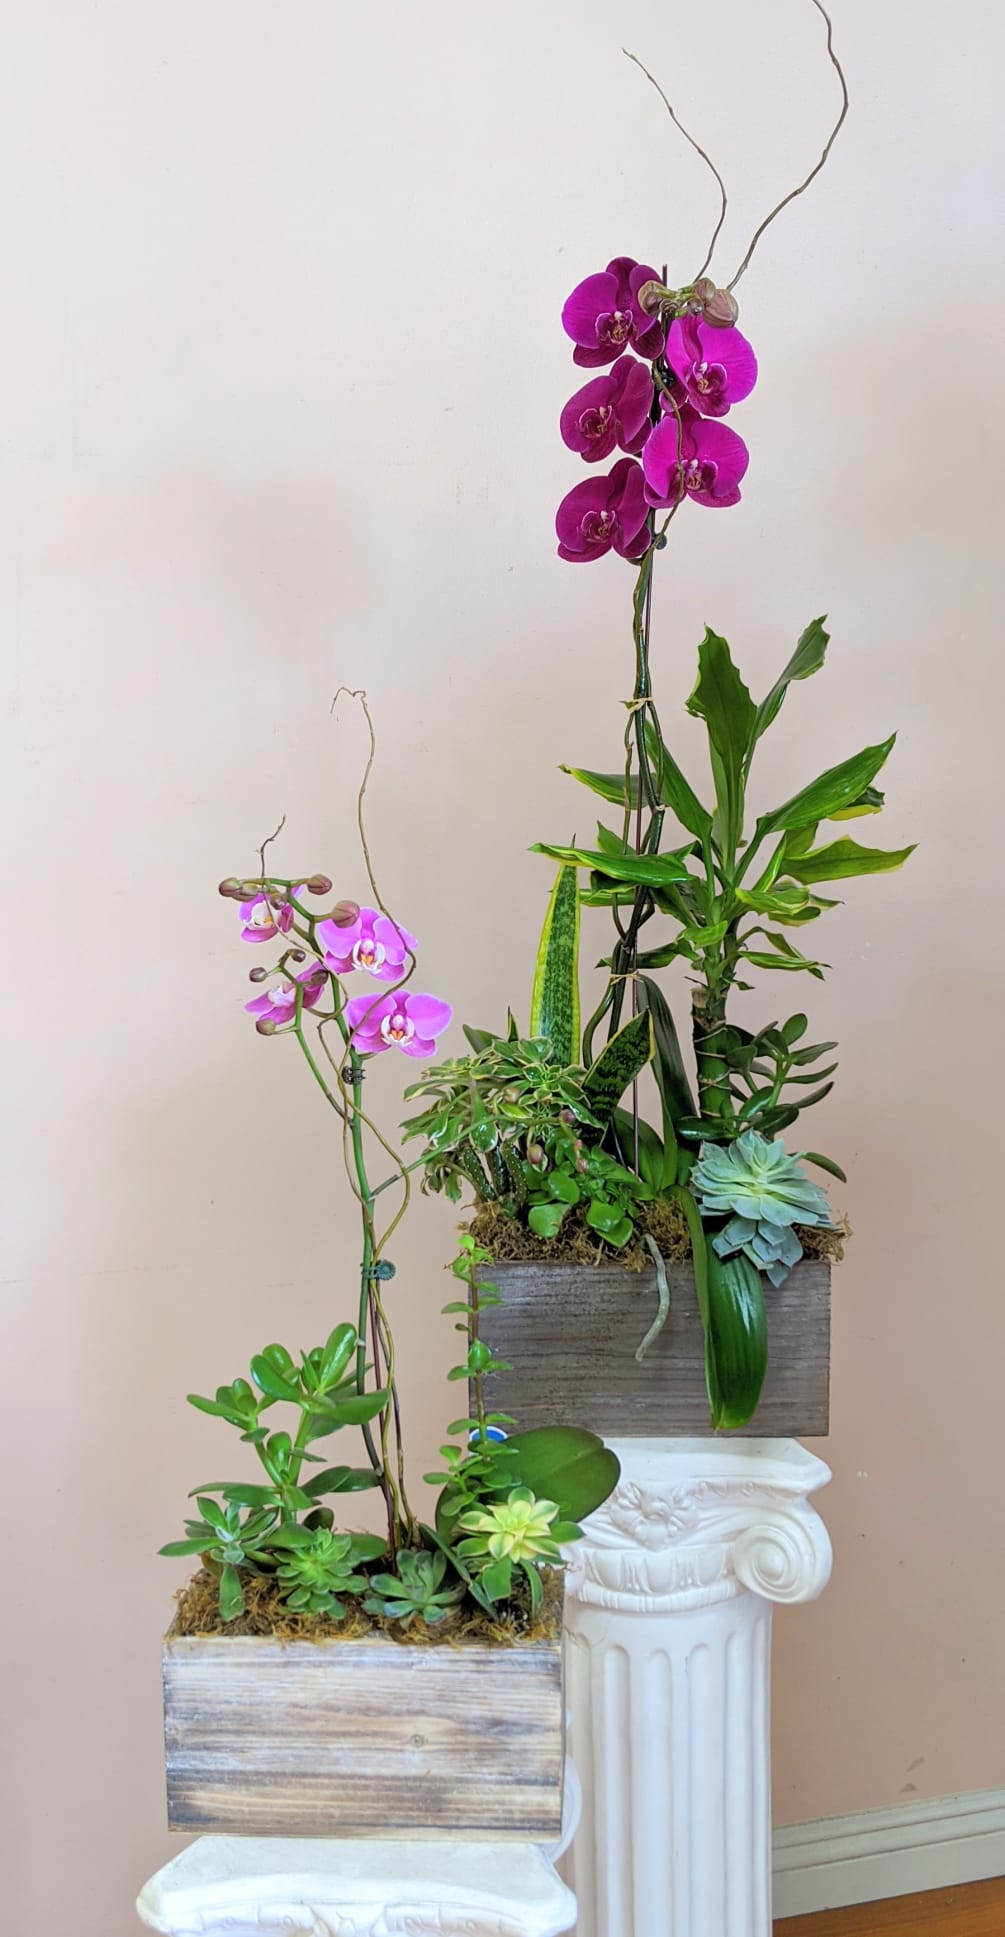 We have several Orchid plant sized to fit all budgets. from a